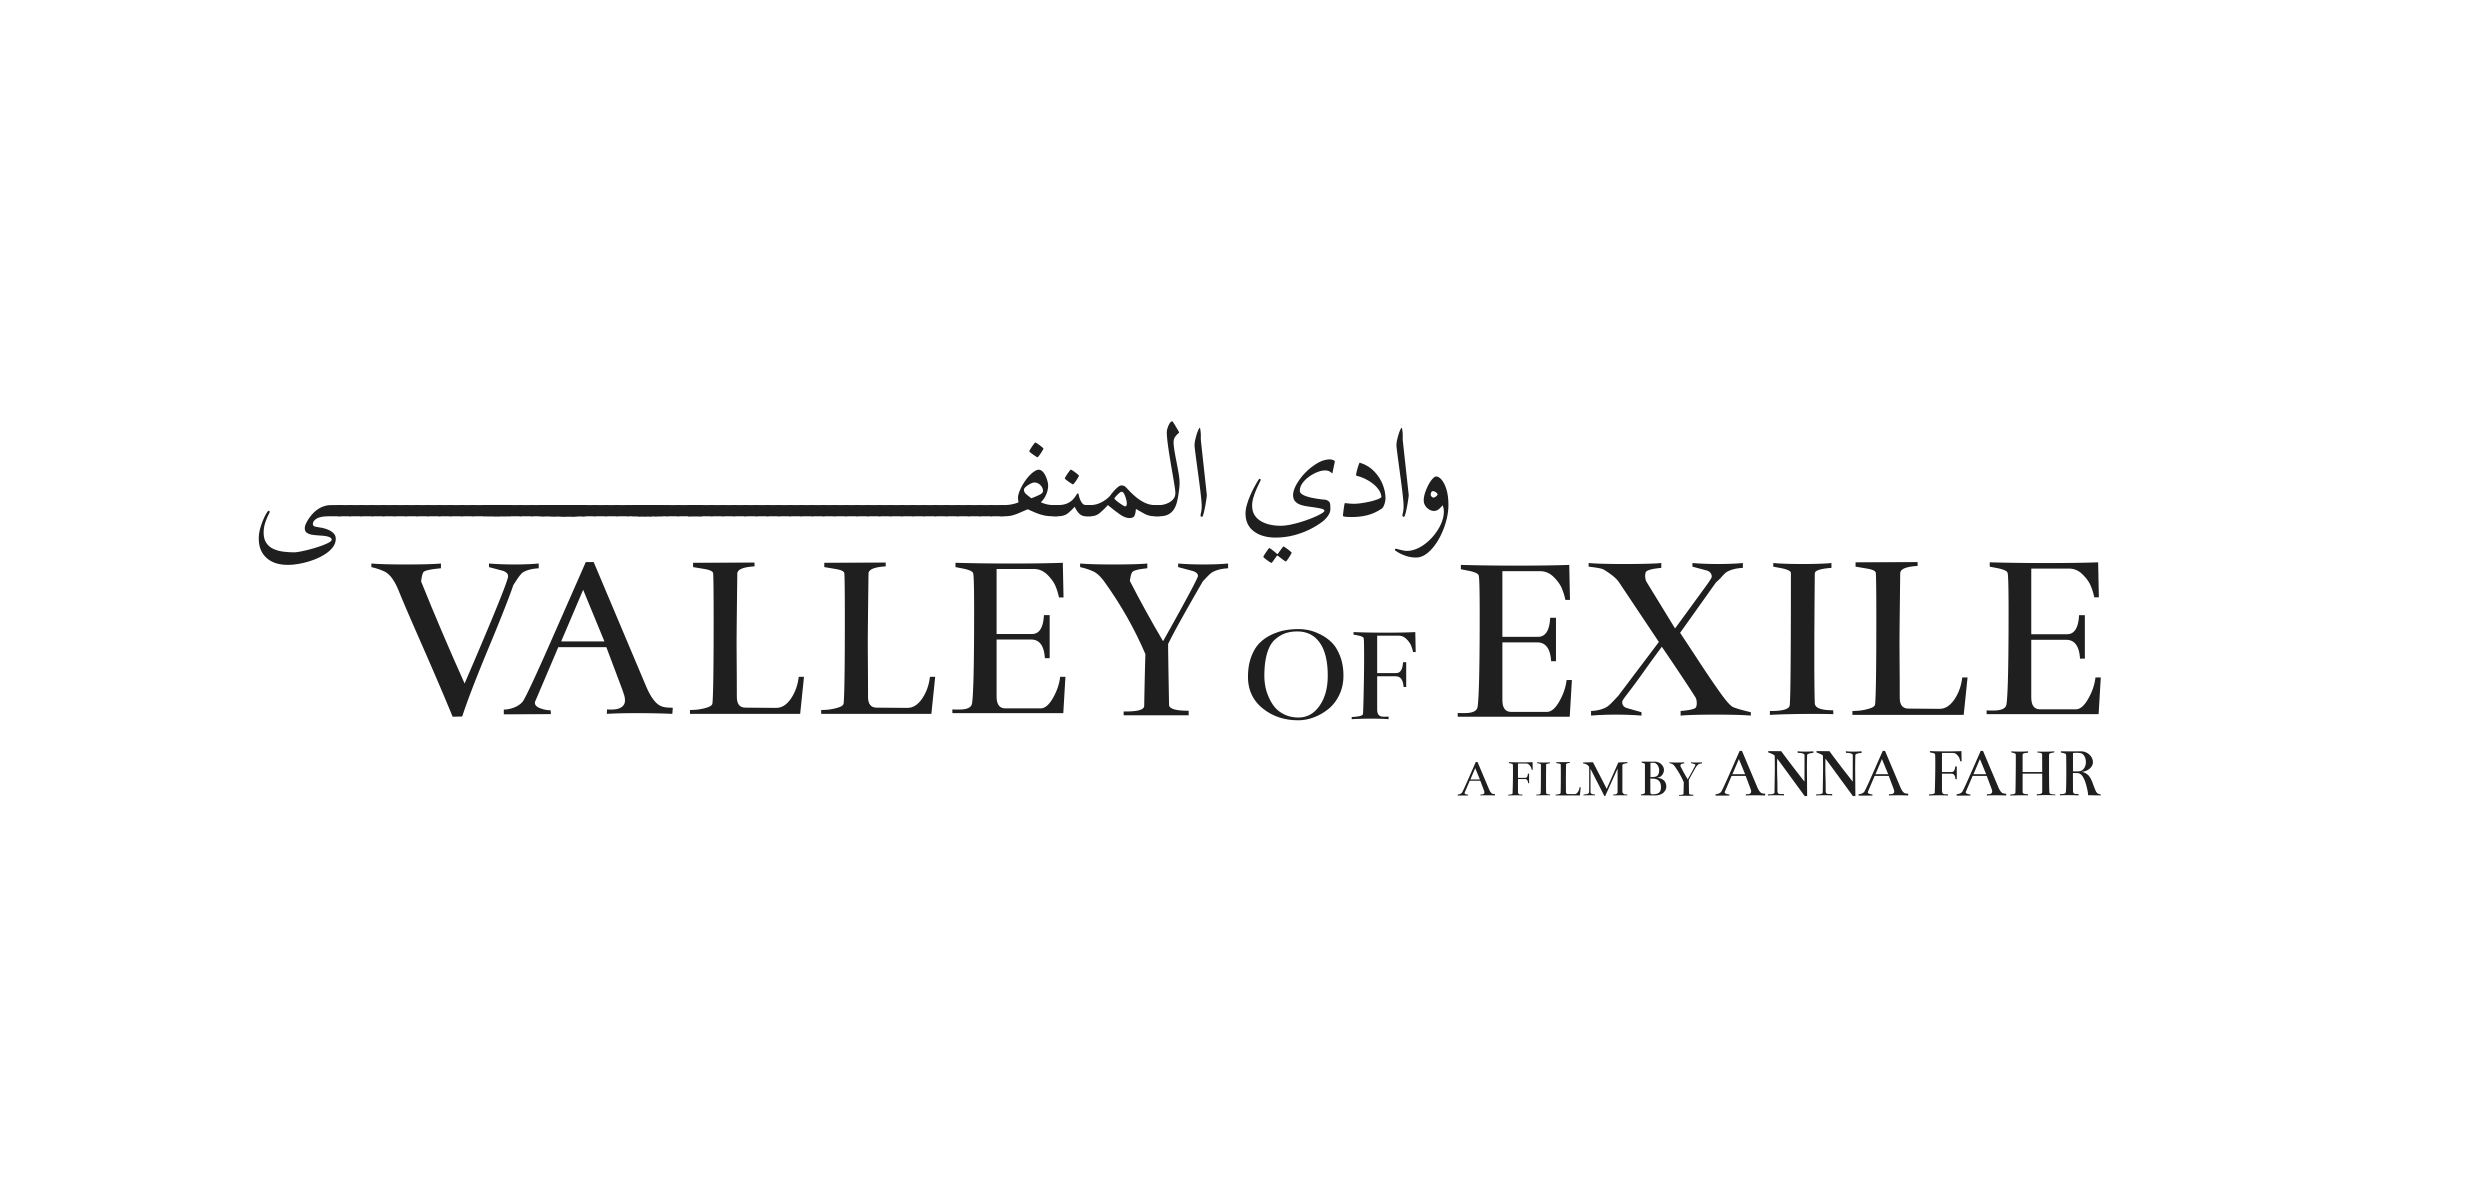 Valley of Exile